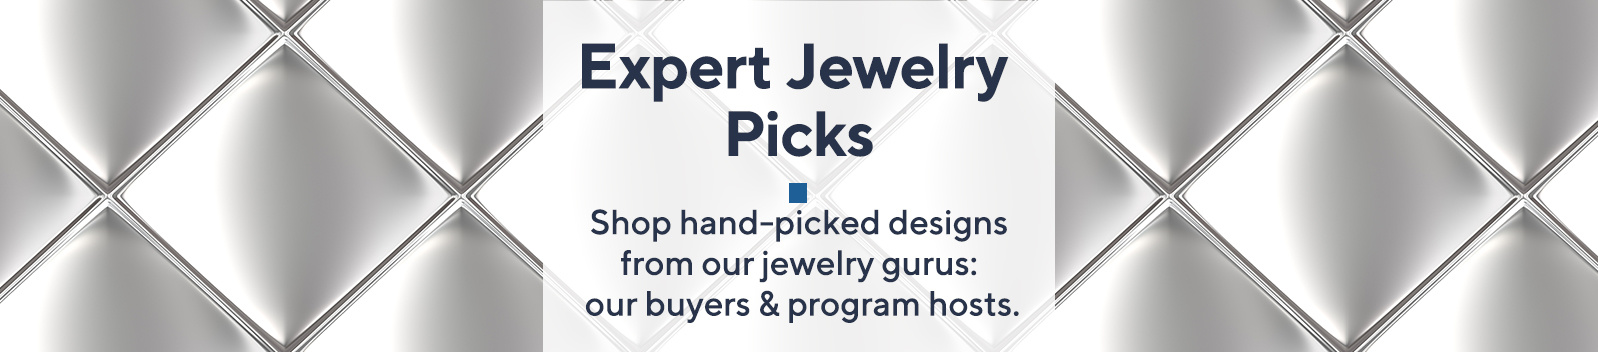 Expert Jewelry Picks - Shop hand-picked designs from our jewelry gurus: our buyers & program hosts.